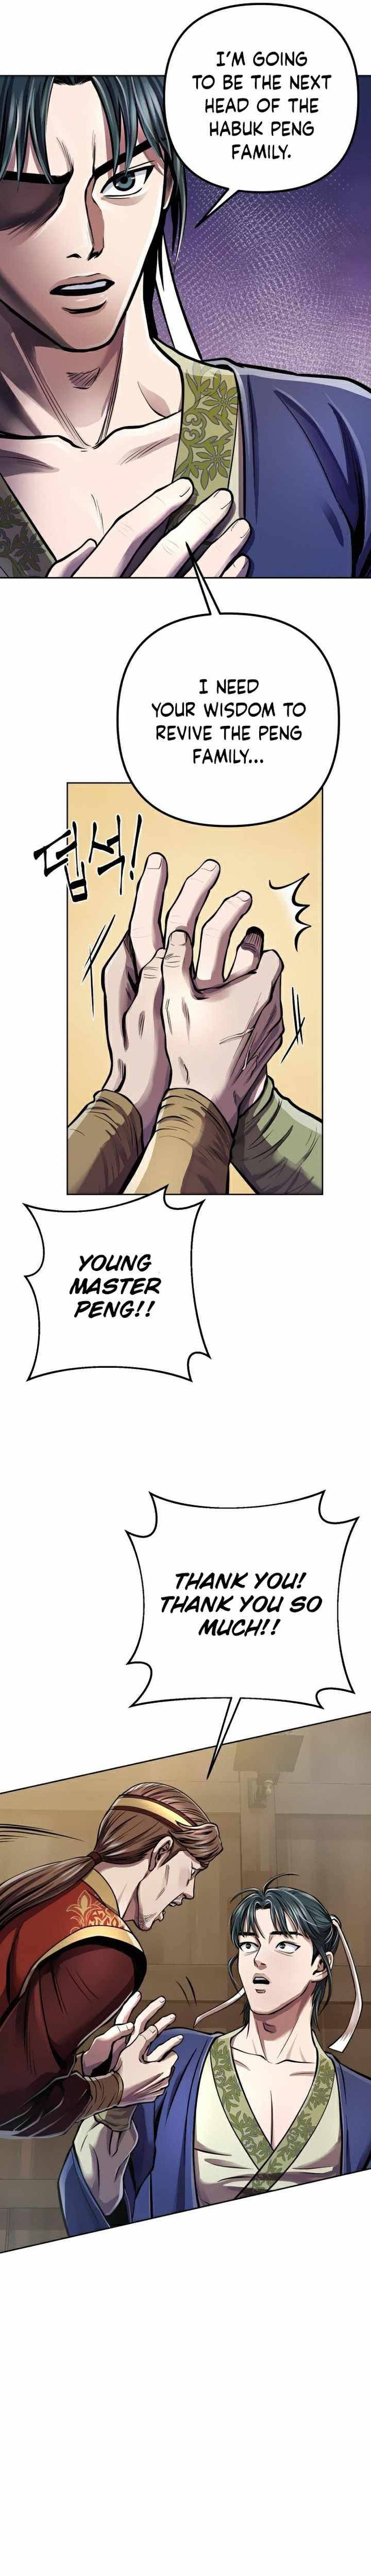 Revenge Of Young Master Peng 15 29